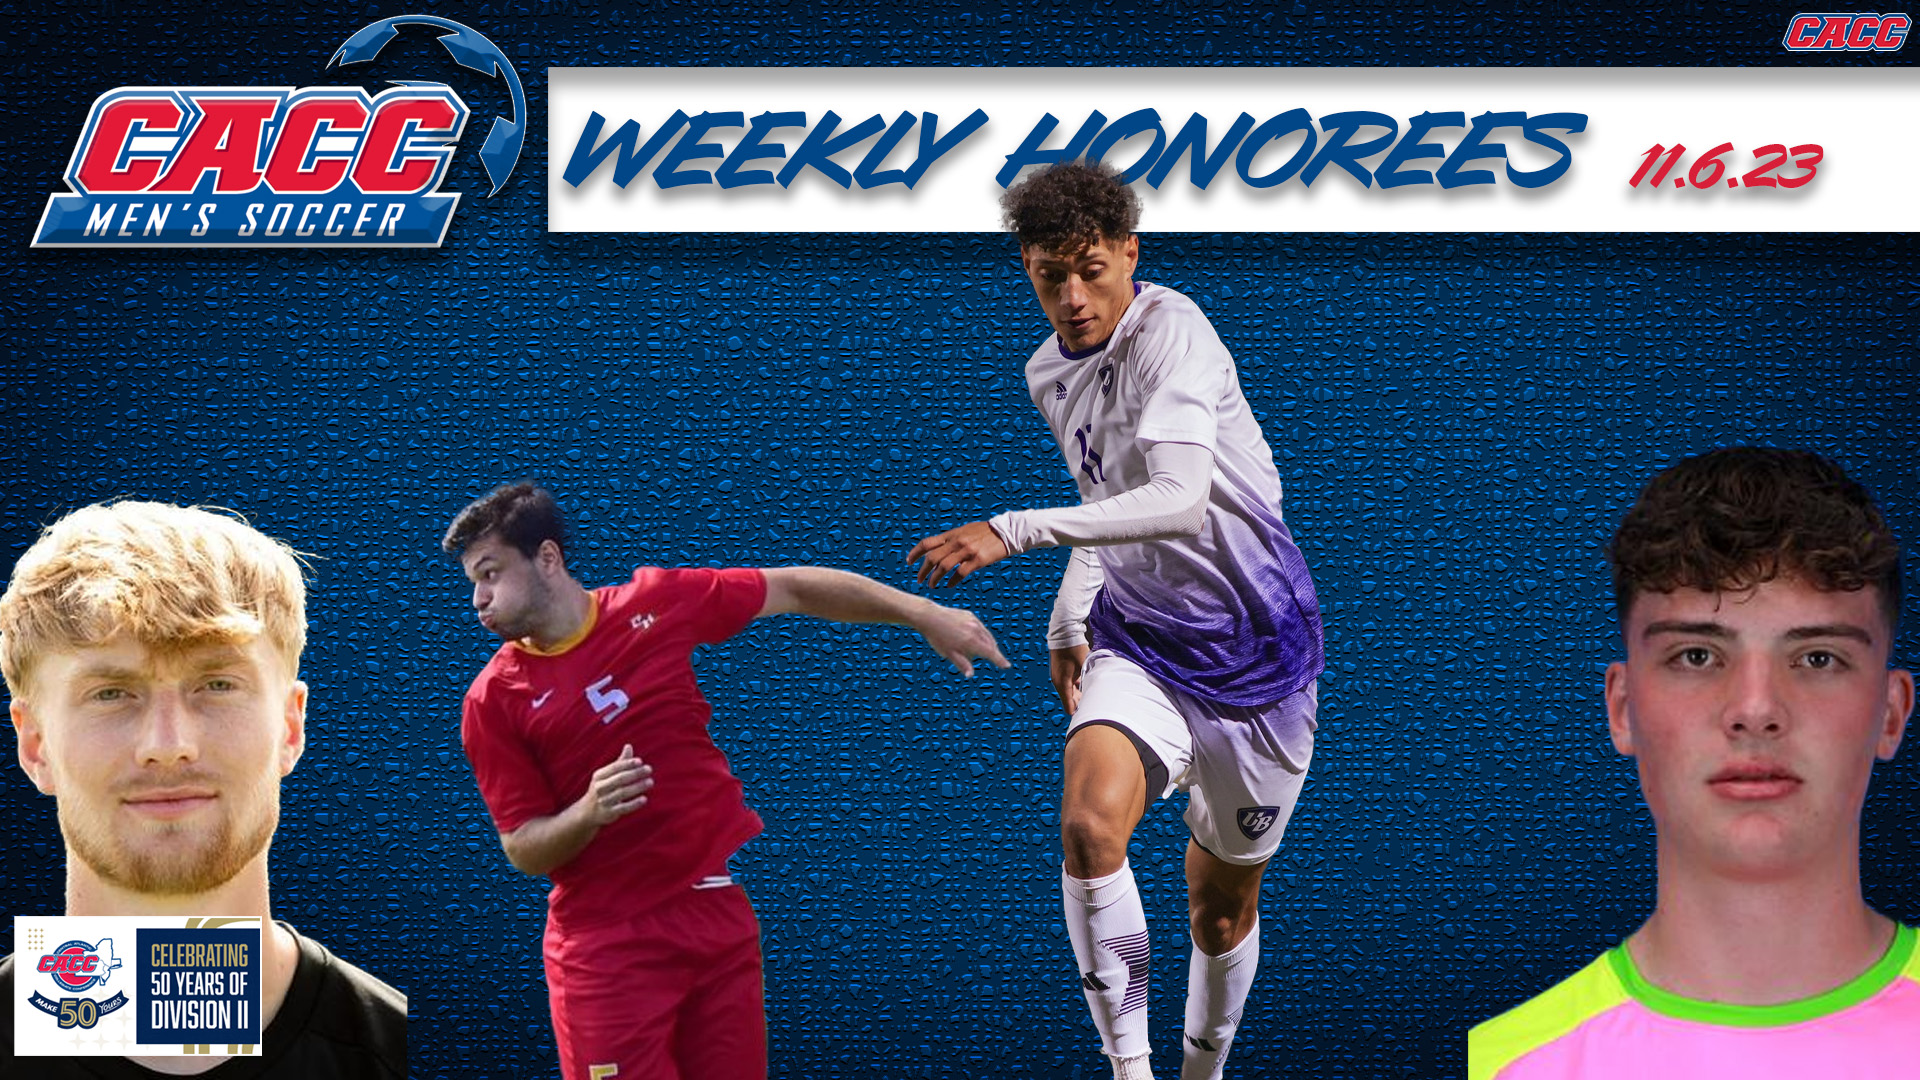 CACC Men's Soccer Weekly Honorees (11-6-23)